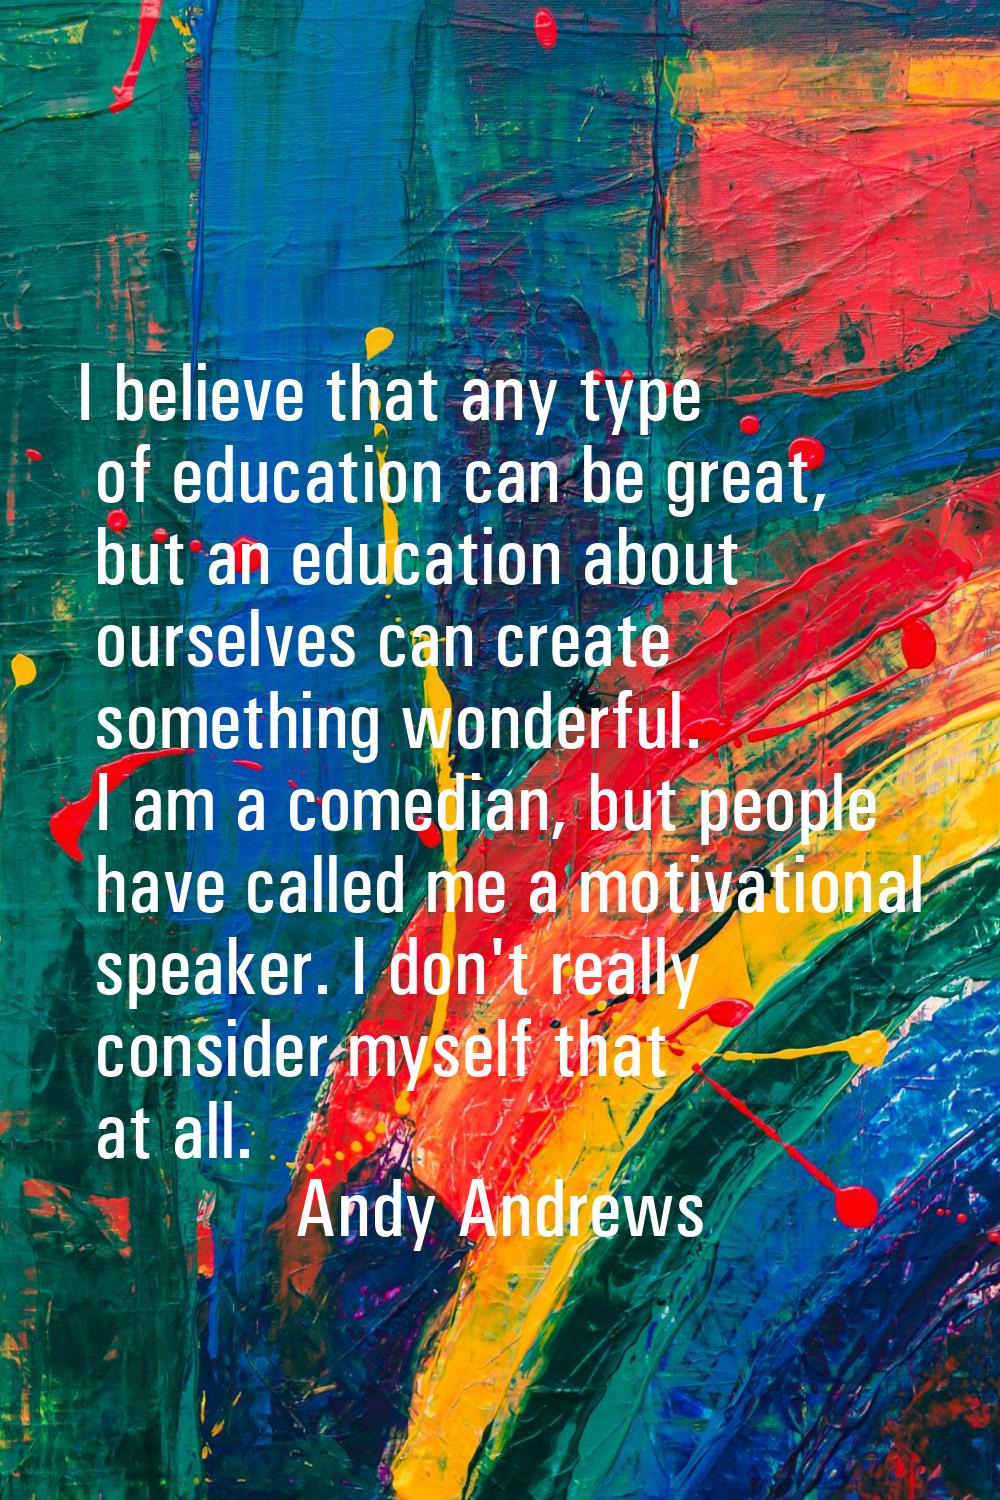 I believe that any type of education can be great, but an education about ourselves can create some